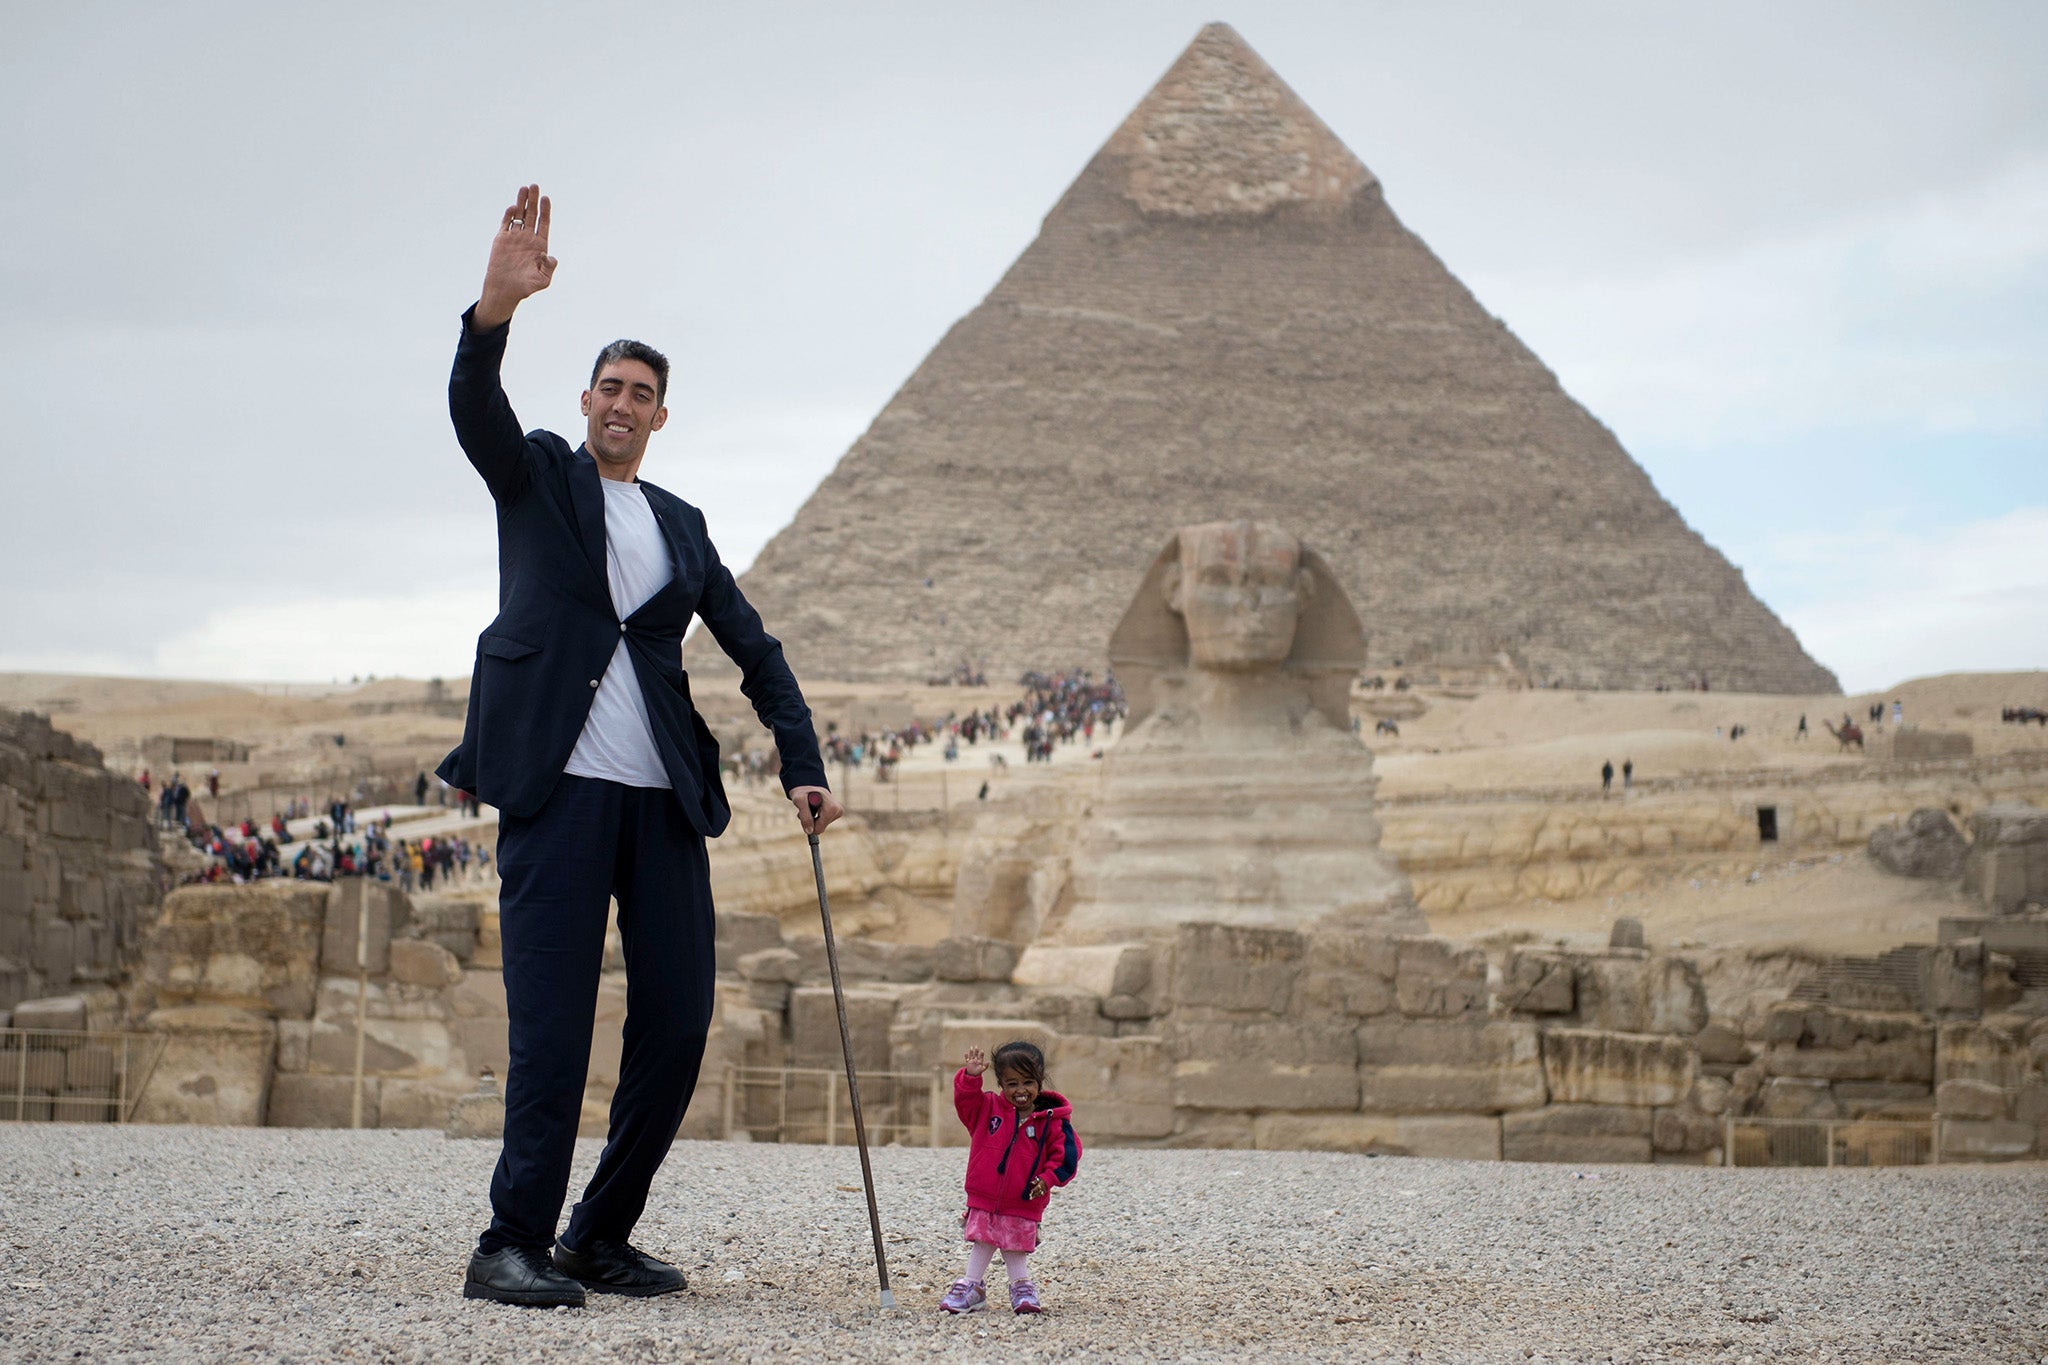 Jyoti Amge is pictured here with the world’s tallest man Sultan Kosen in 2018, when they posed next to the Great Sphinx of Giza